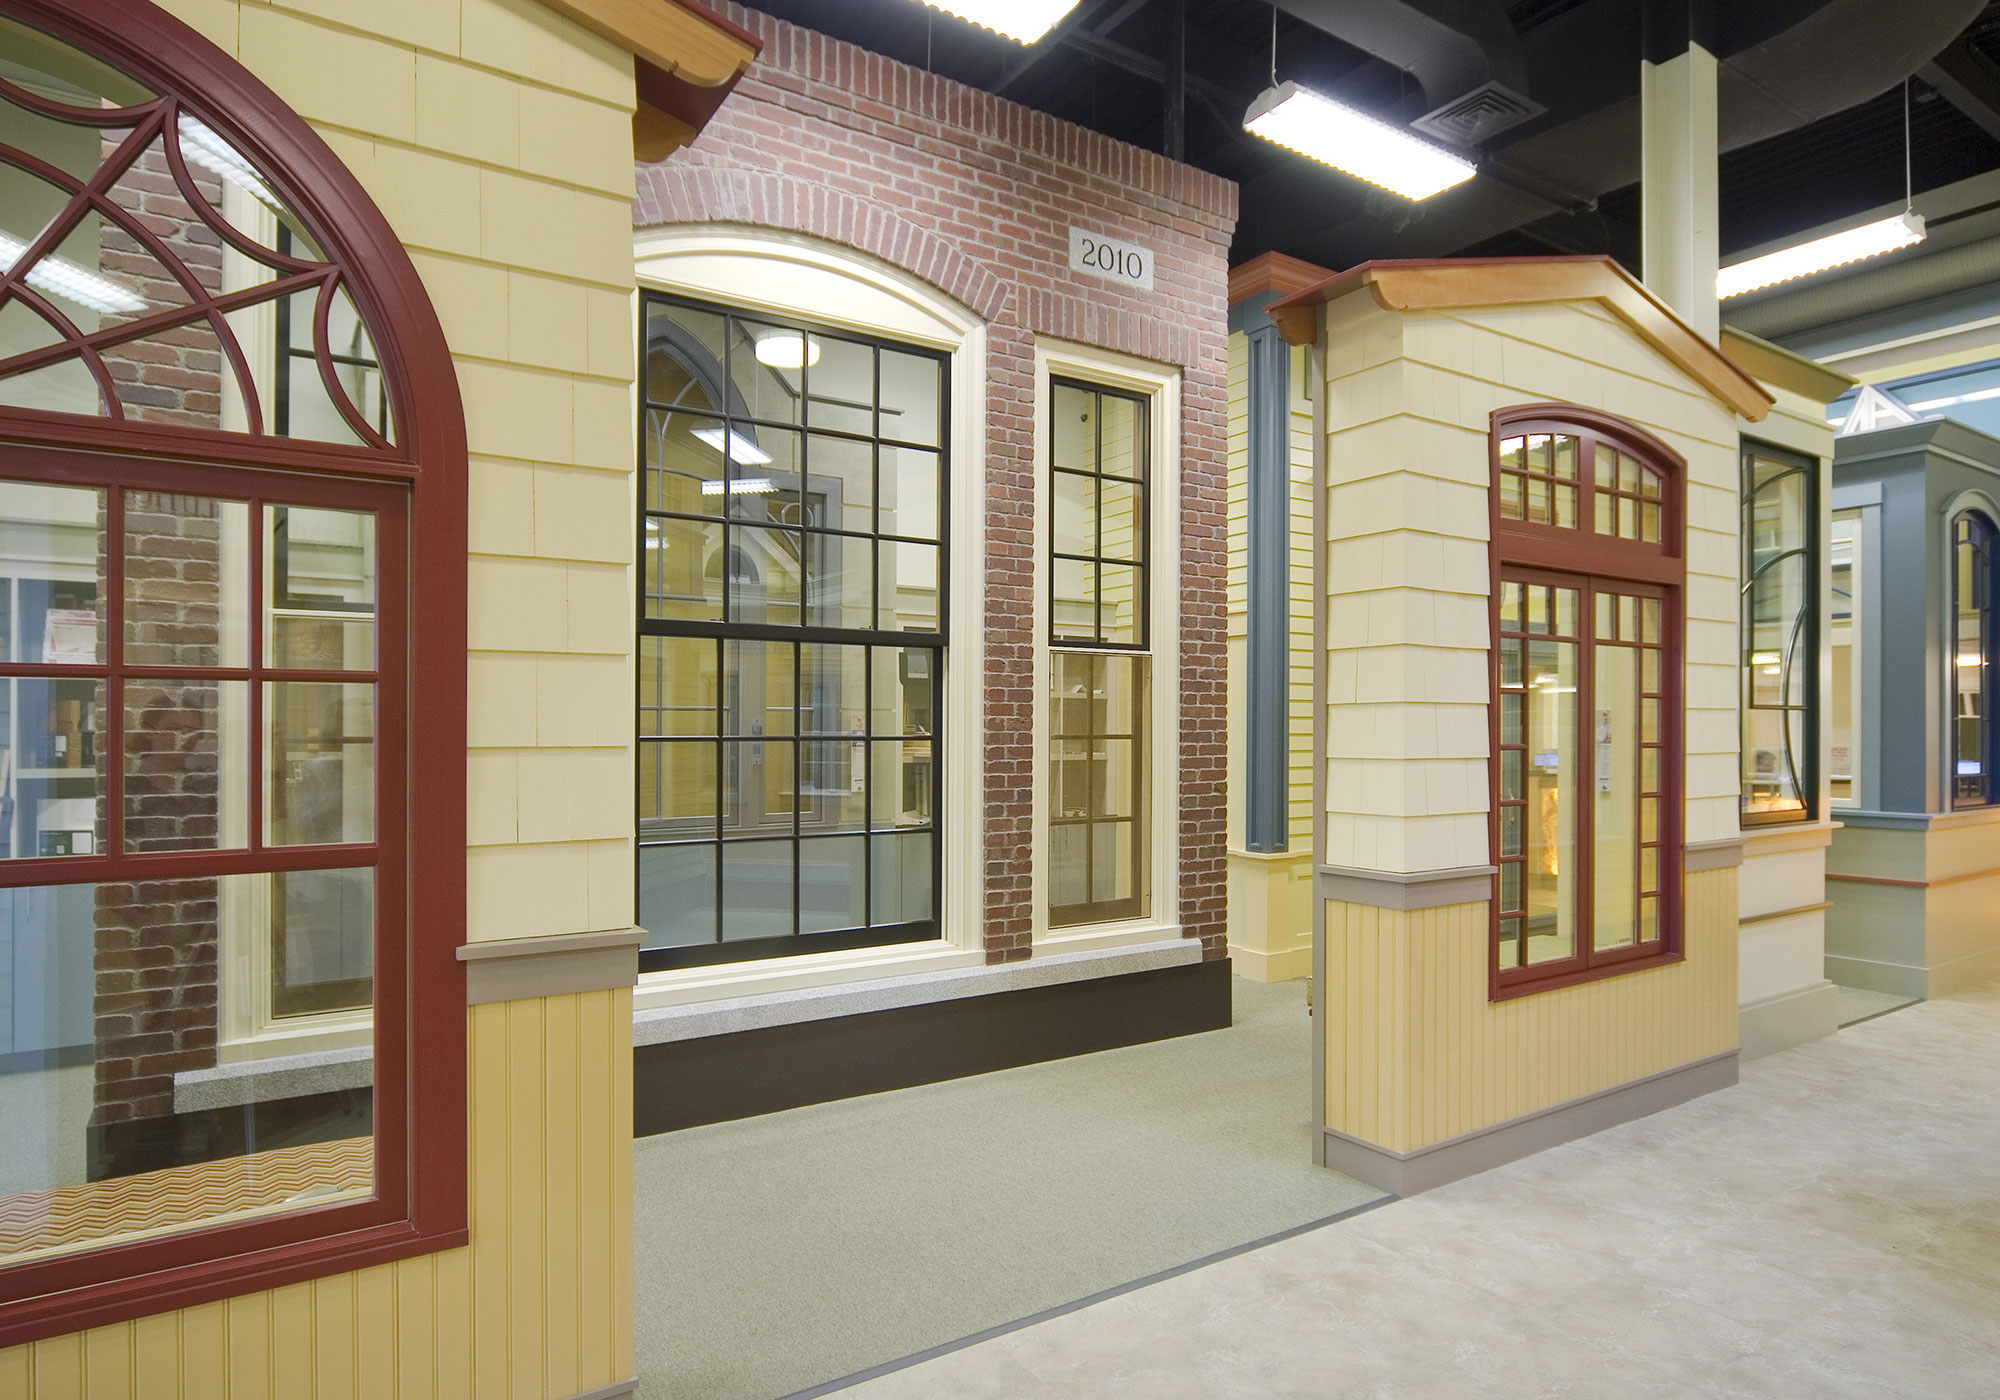 A historic, arched window display in the Marvin Design Gallery showroom